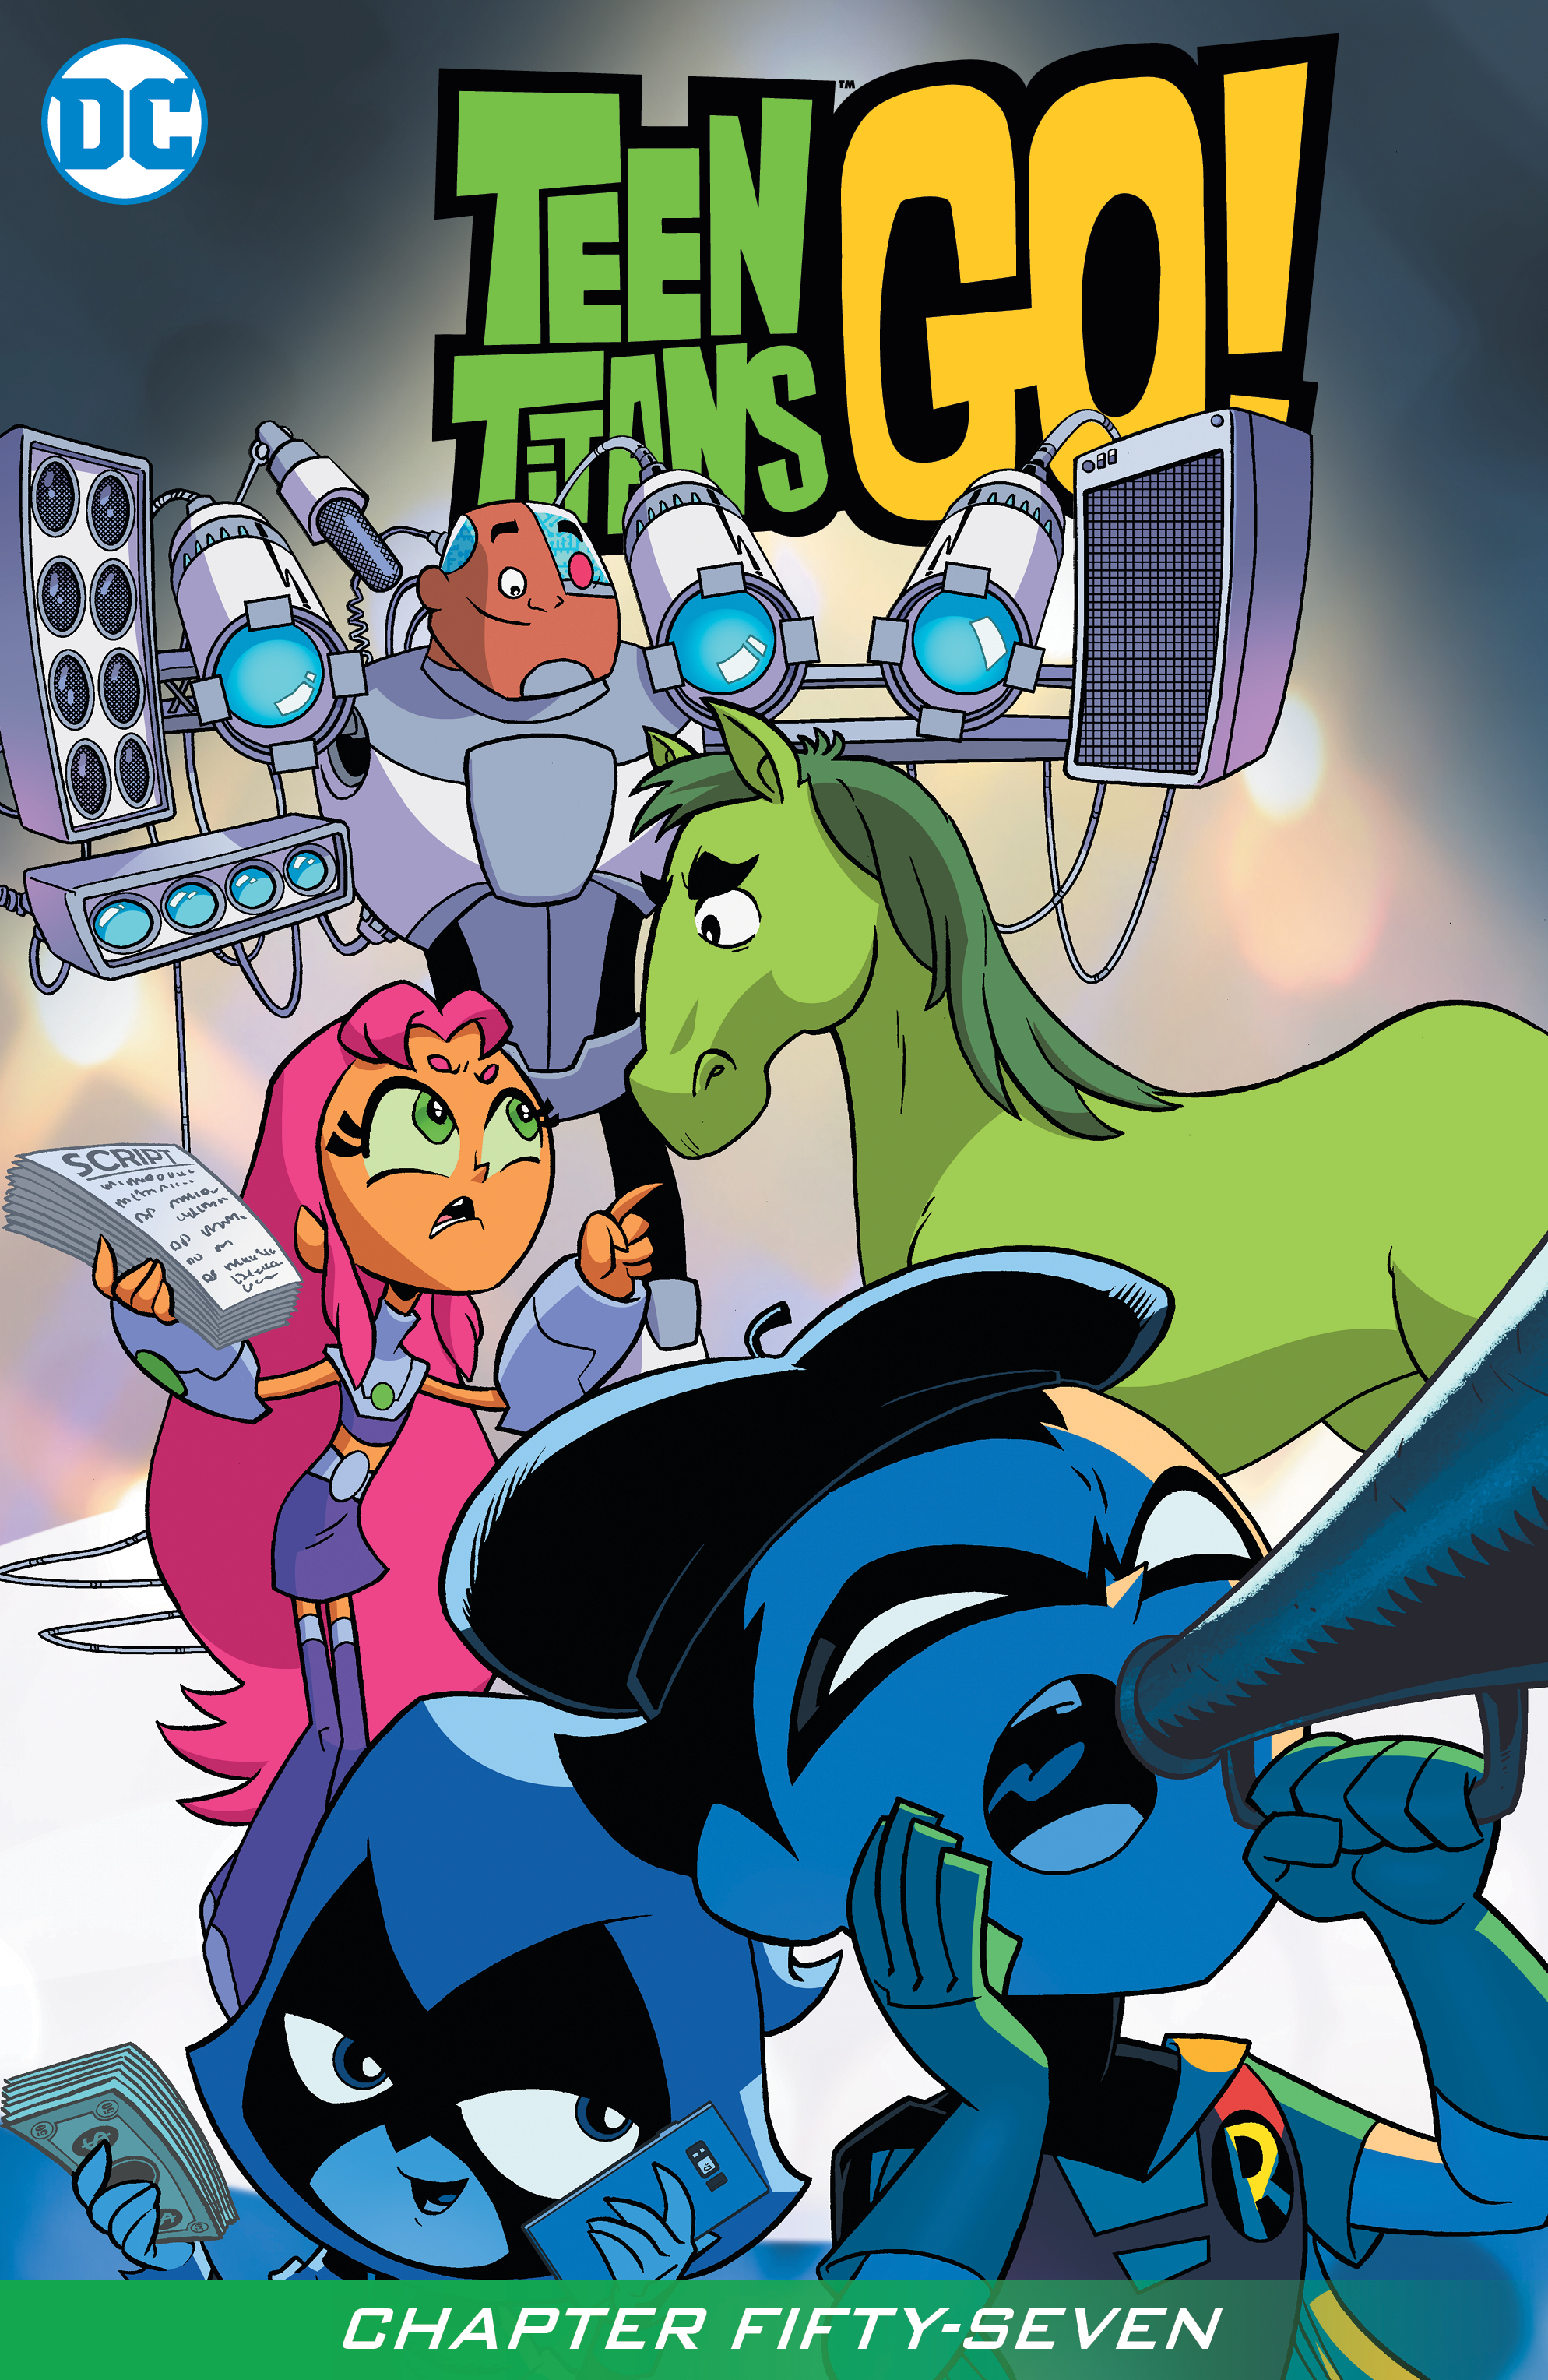 Teen Titans Go! (2013-) #57 preview images